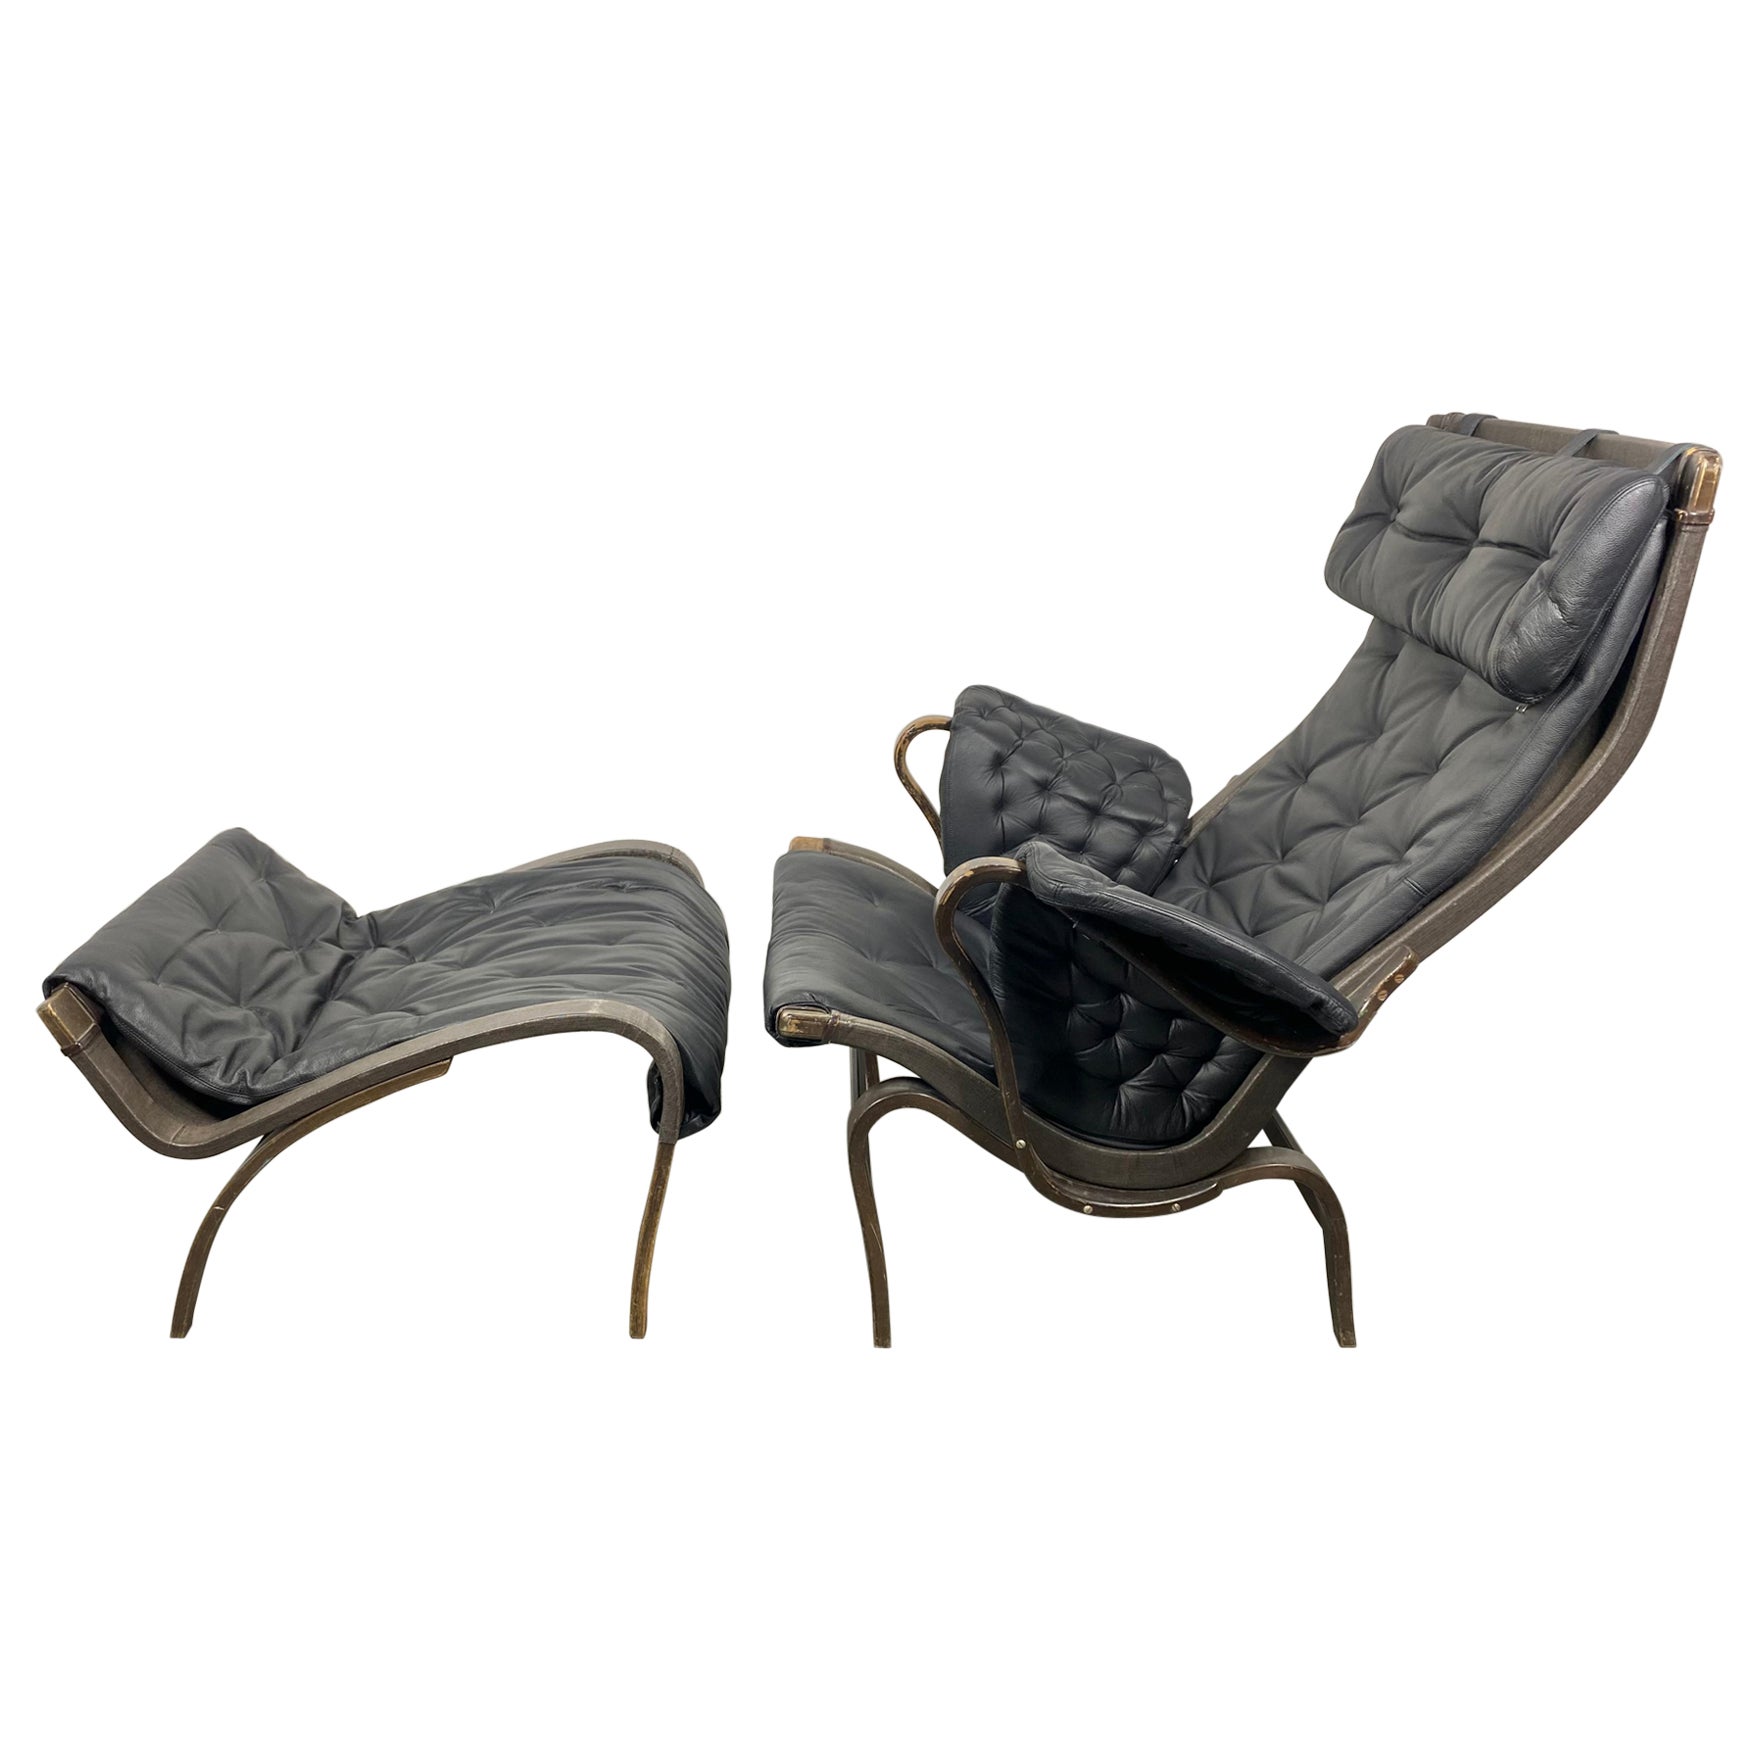 Pernilla Leather Lounge Chair and Ottoman by Bruno Mathsson for DUX